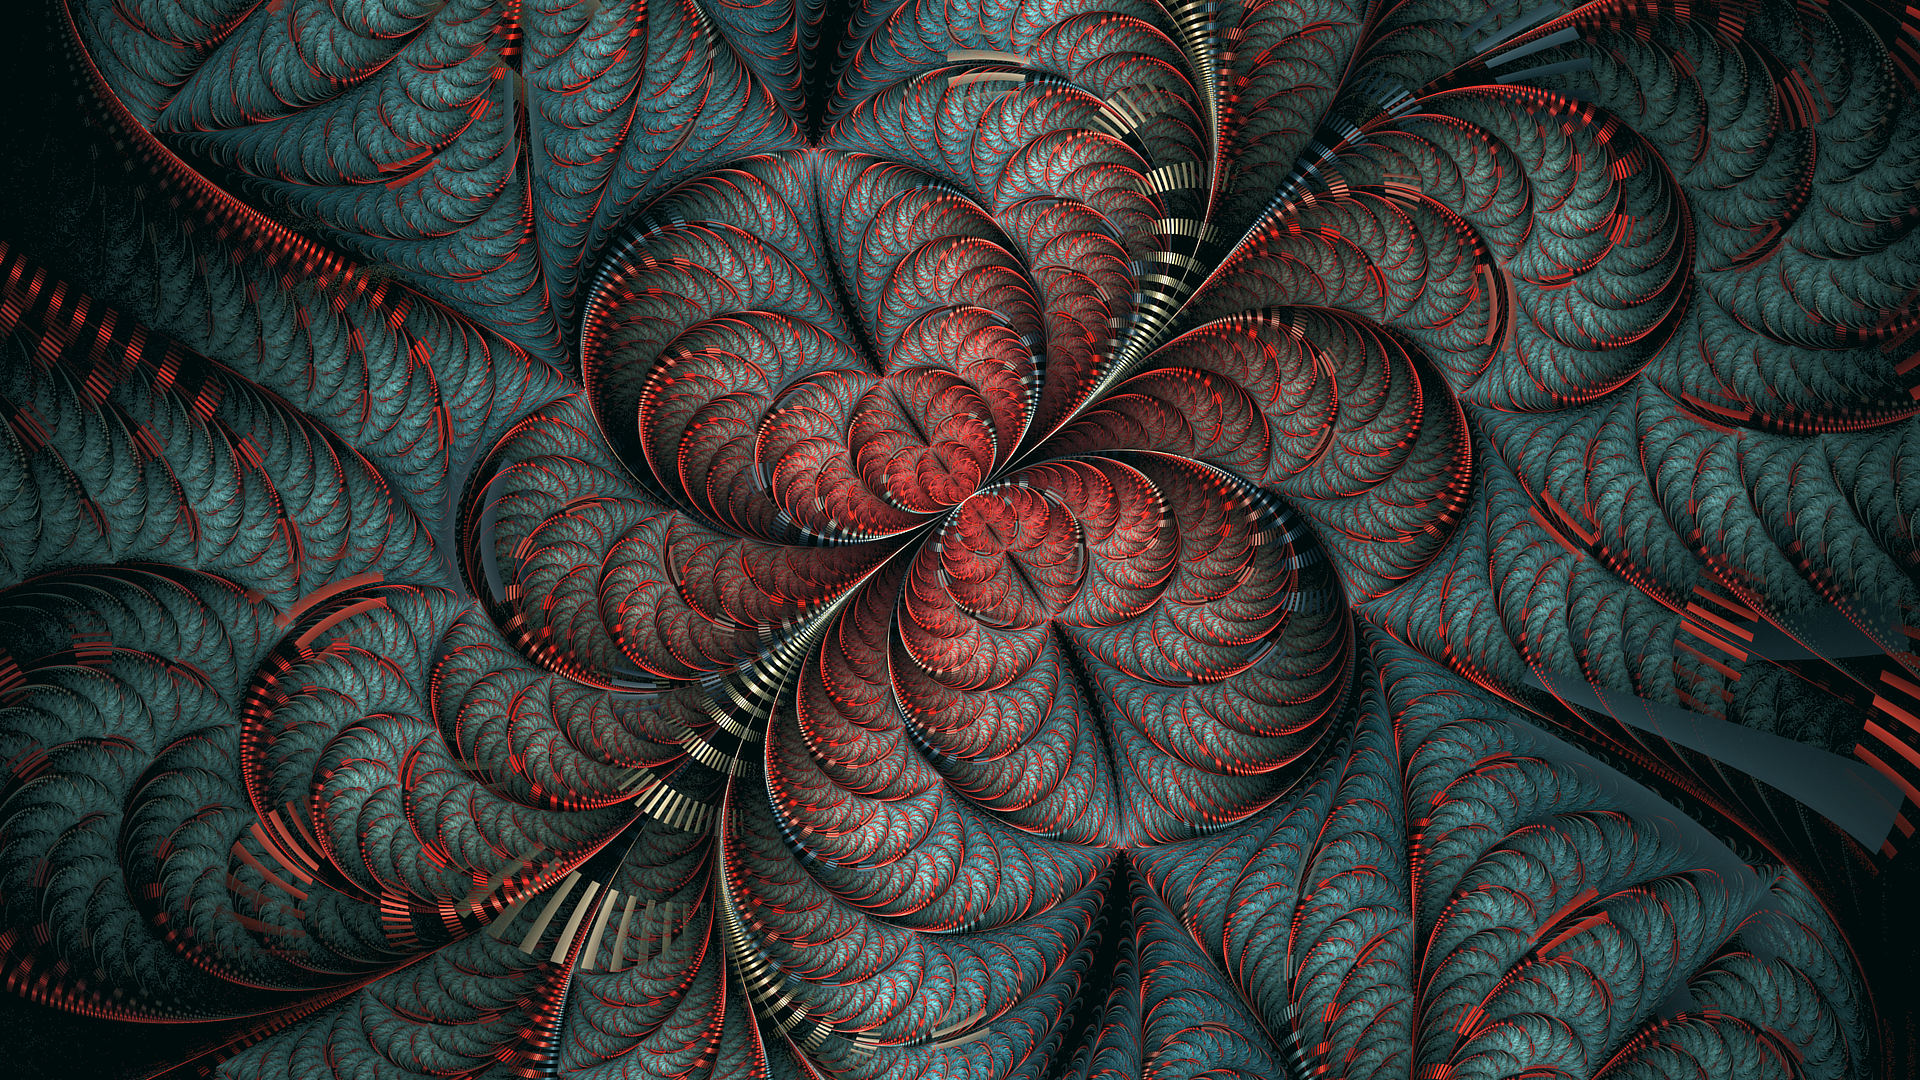 Abstract Fractal 1920x1080